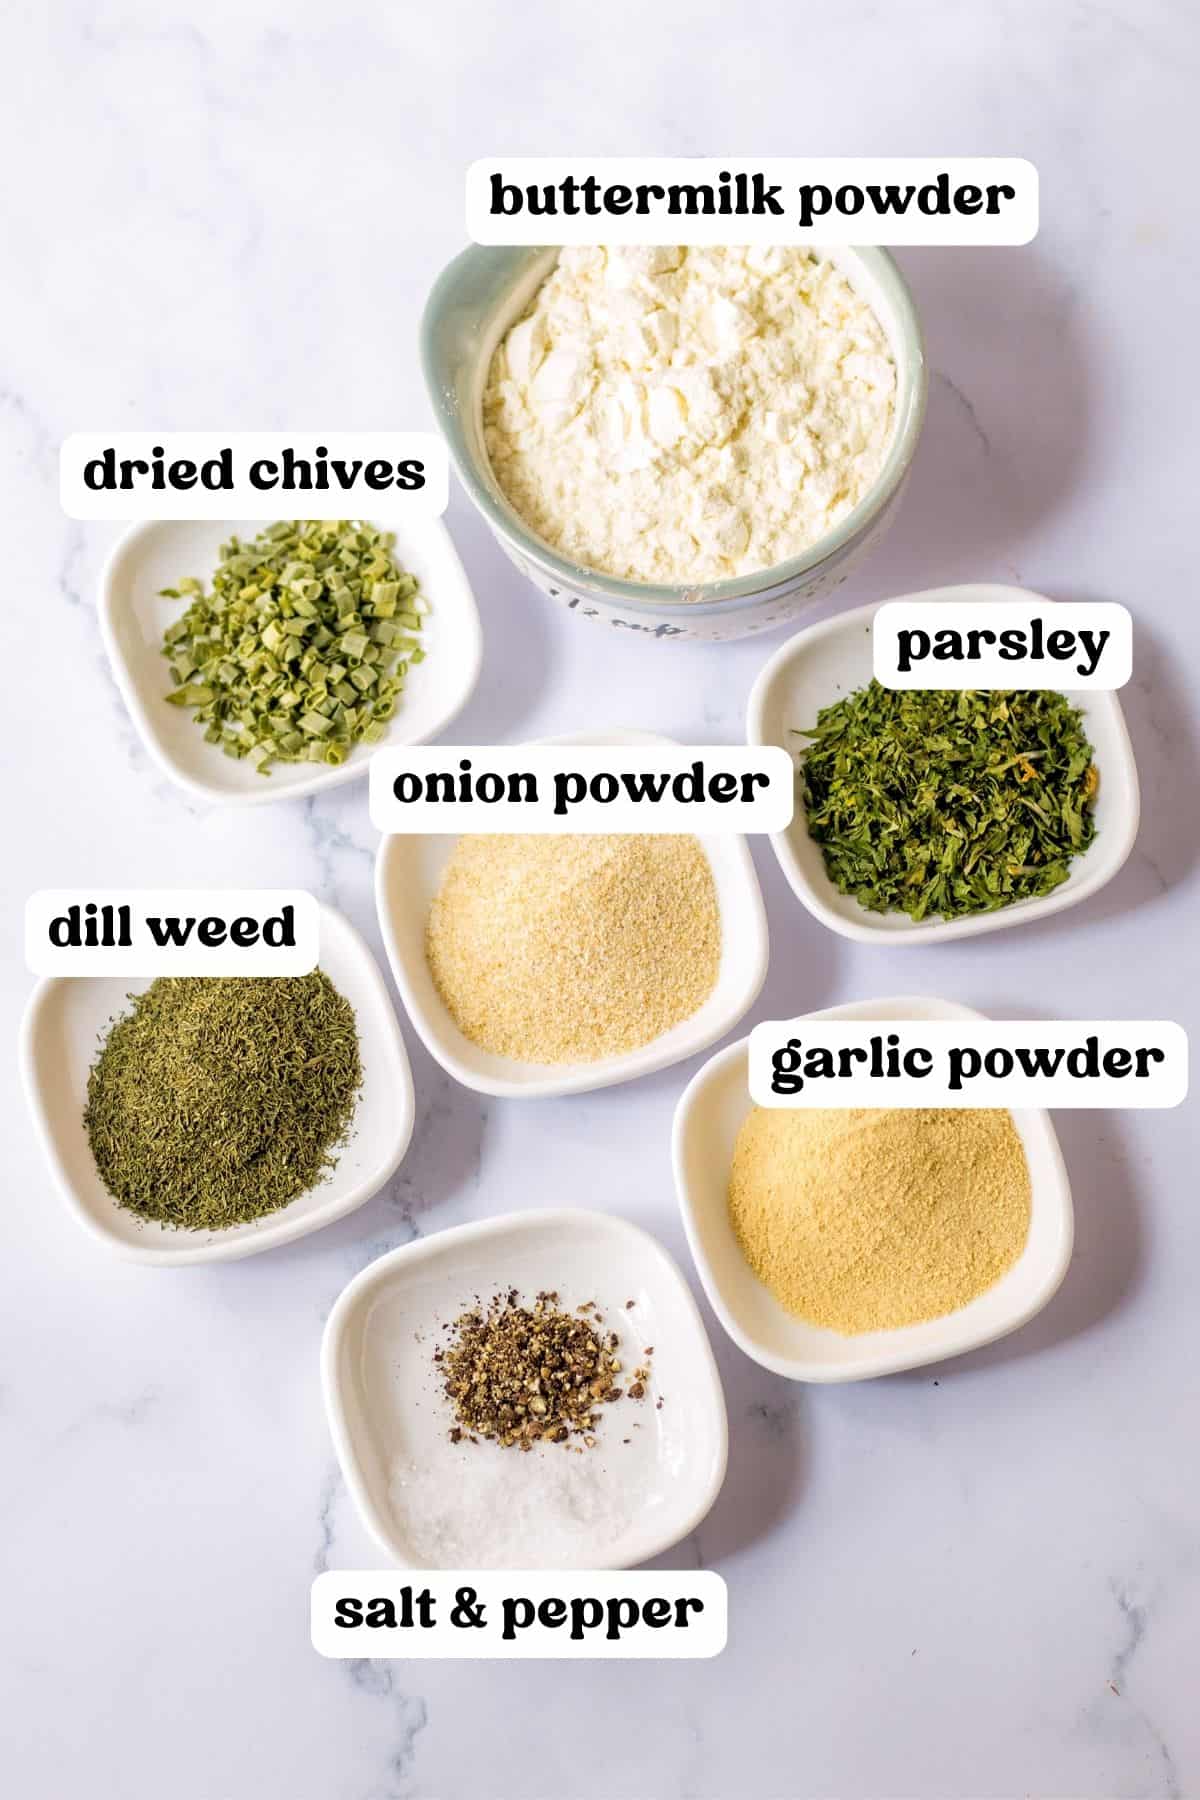 Ingredients in Ranch Seasoning mix: buttermilk powder, dried herbs and spices.